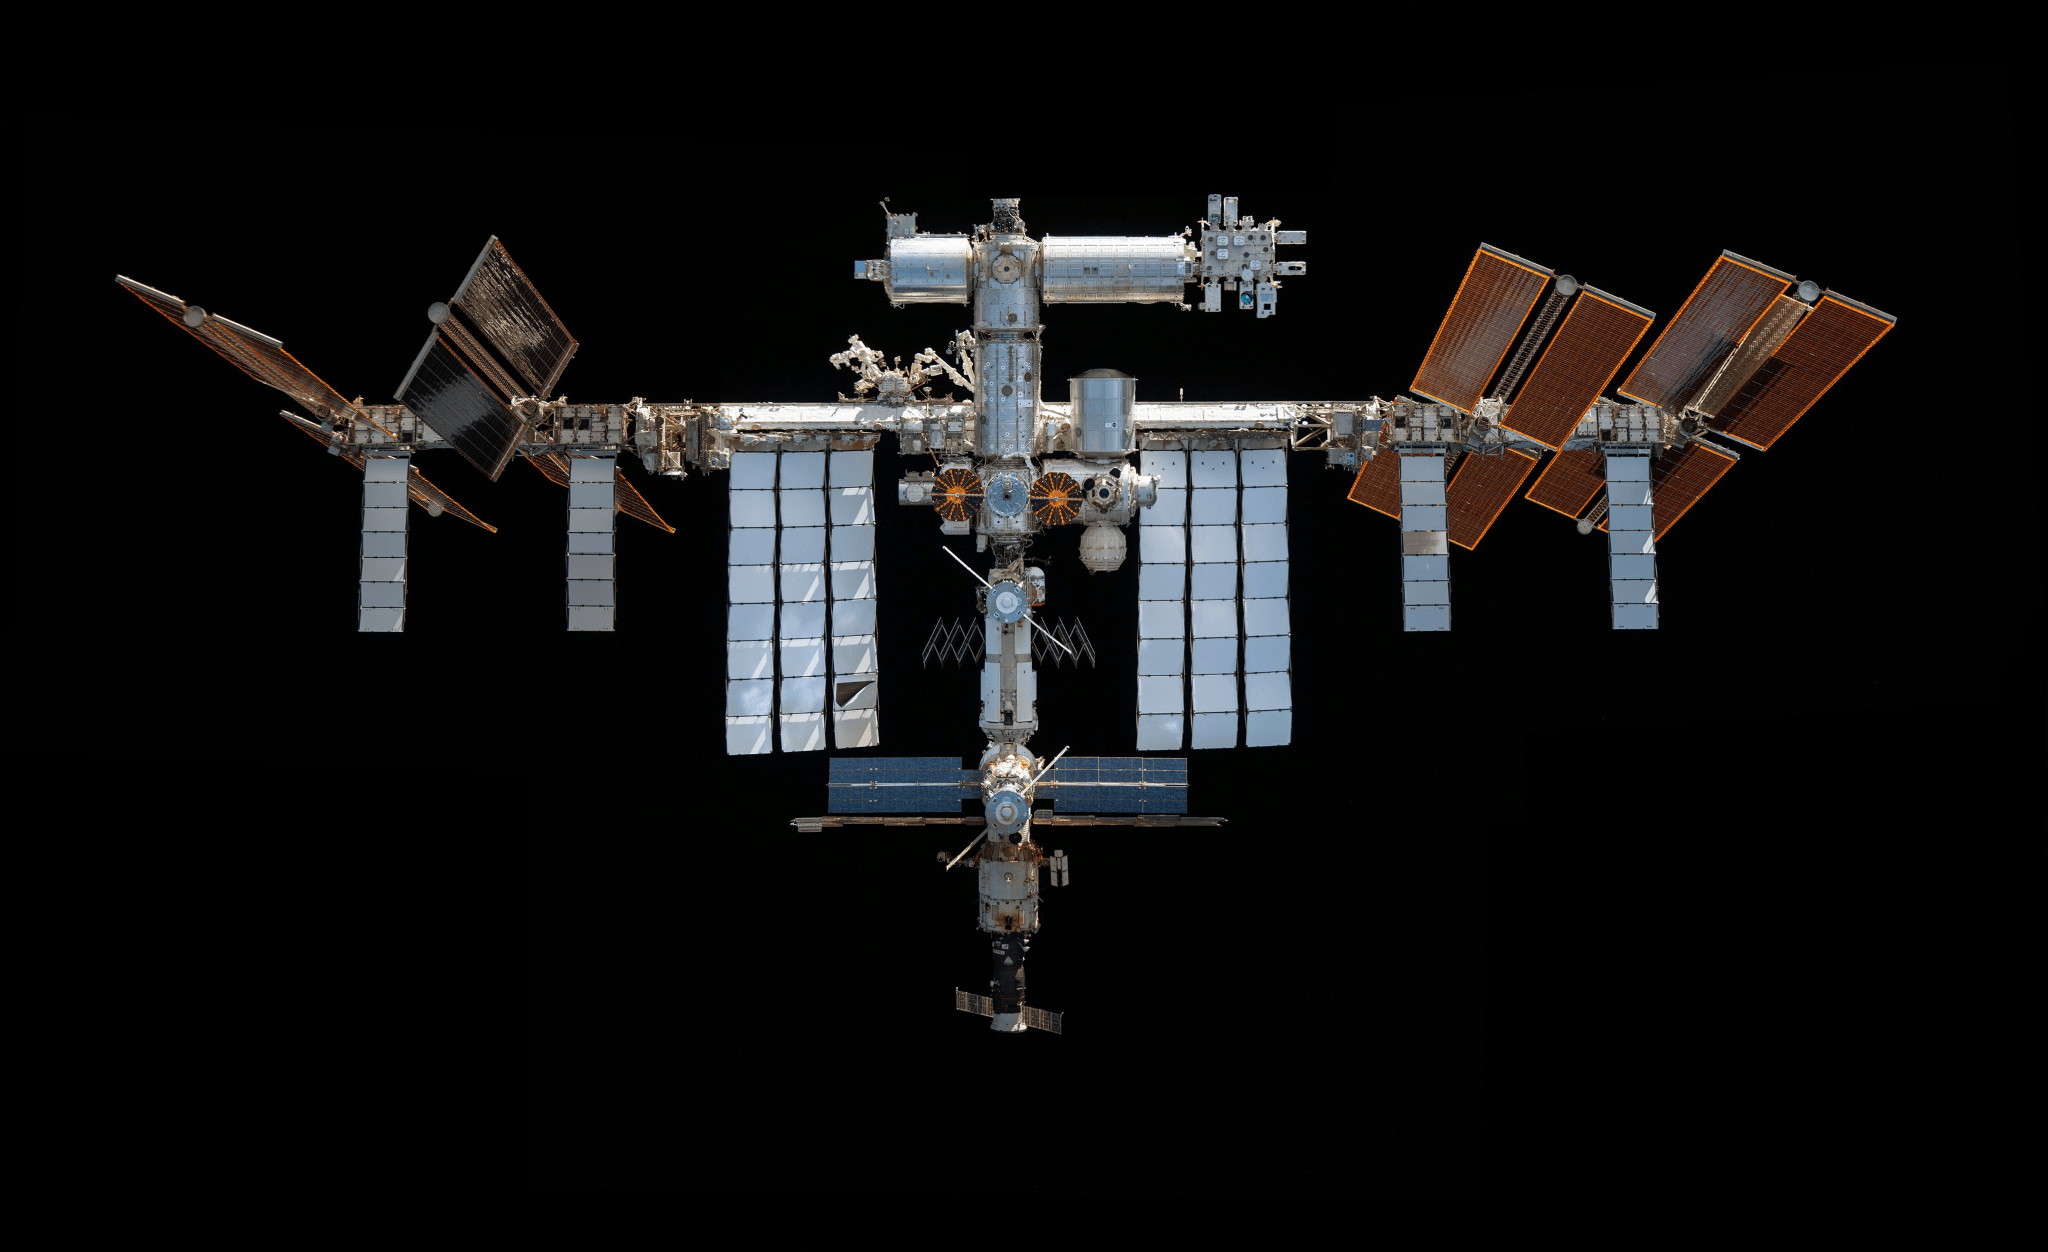 image of the entire space station with a black backdrop